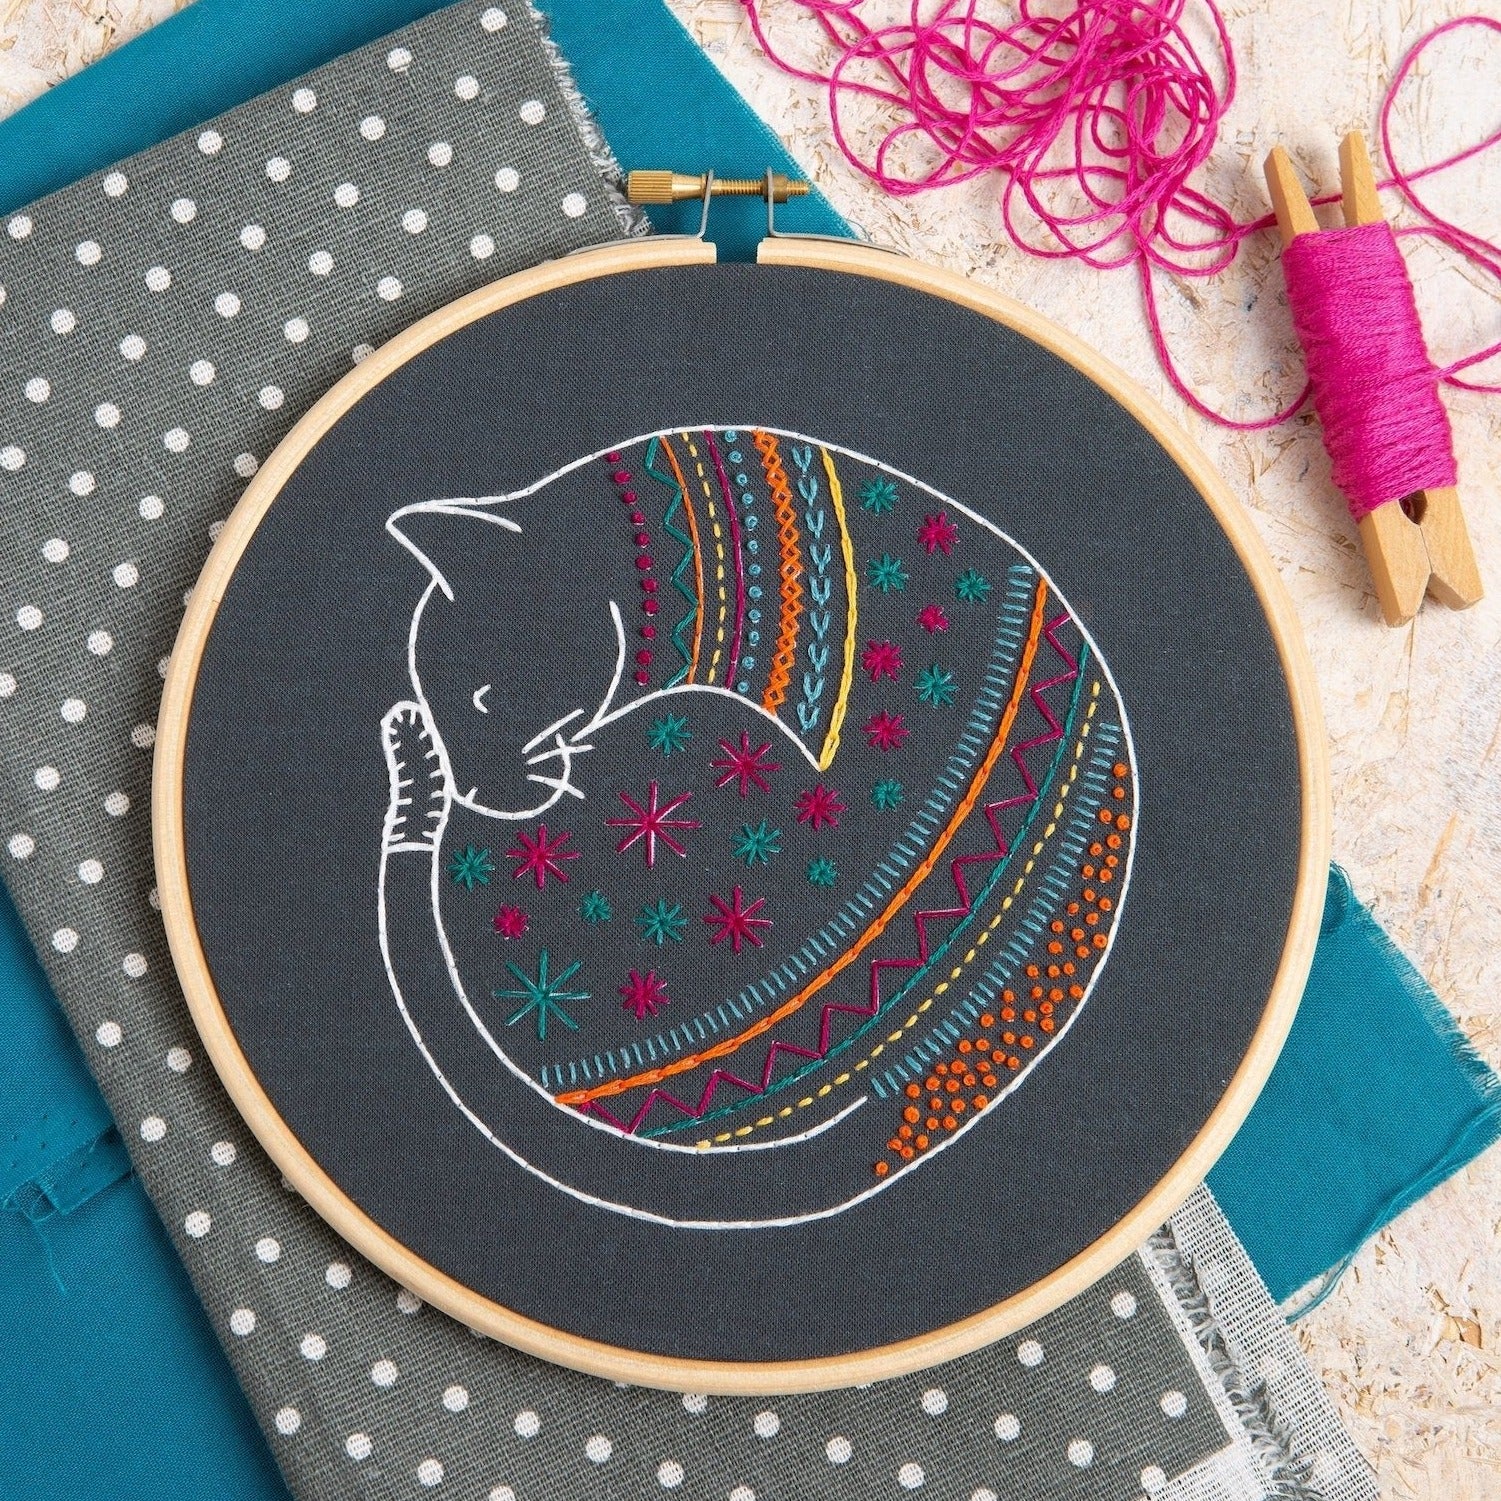 Embroidery Supplies and DIY Embroidery Kits That Are Perfect for